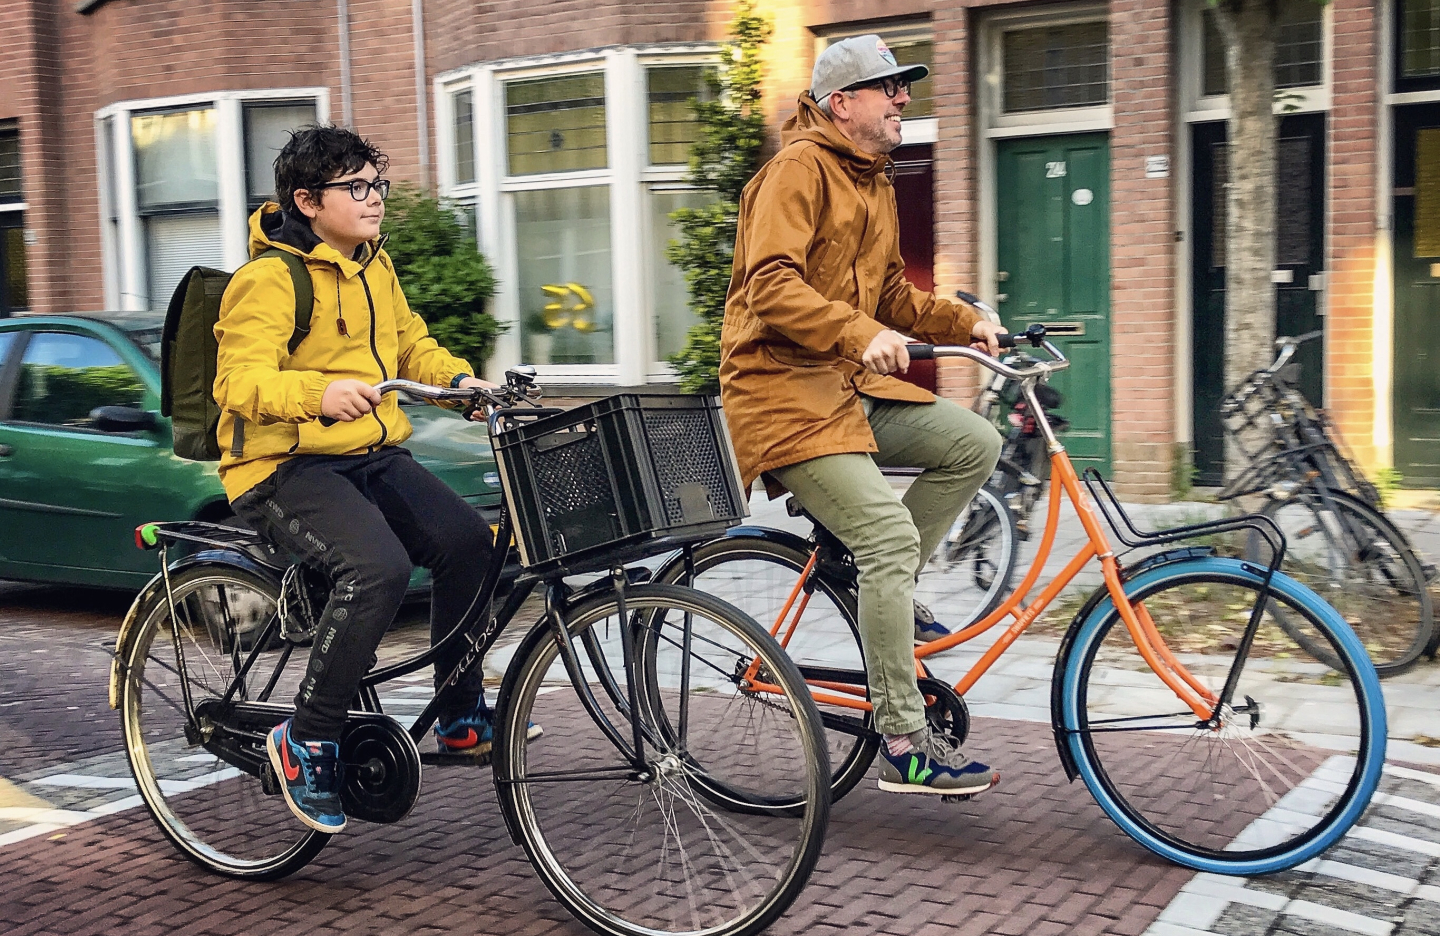 Chris Bruntlett and his son cycle next to each other on a Dutch street 